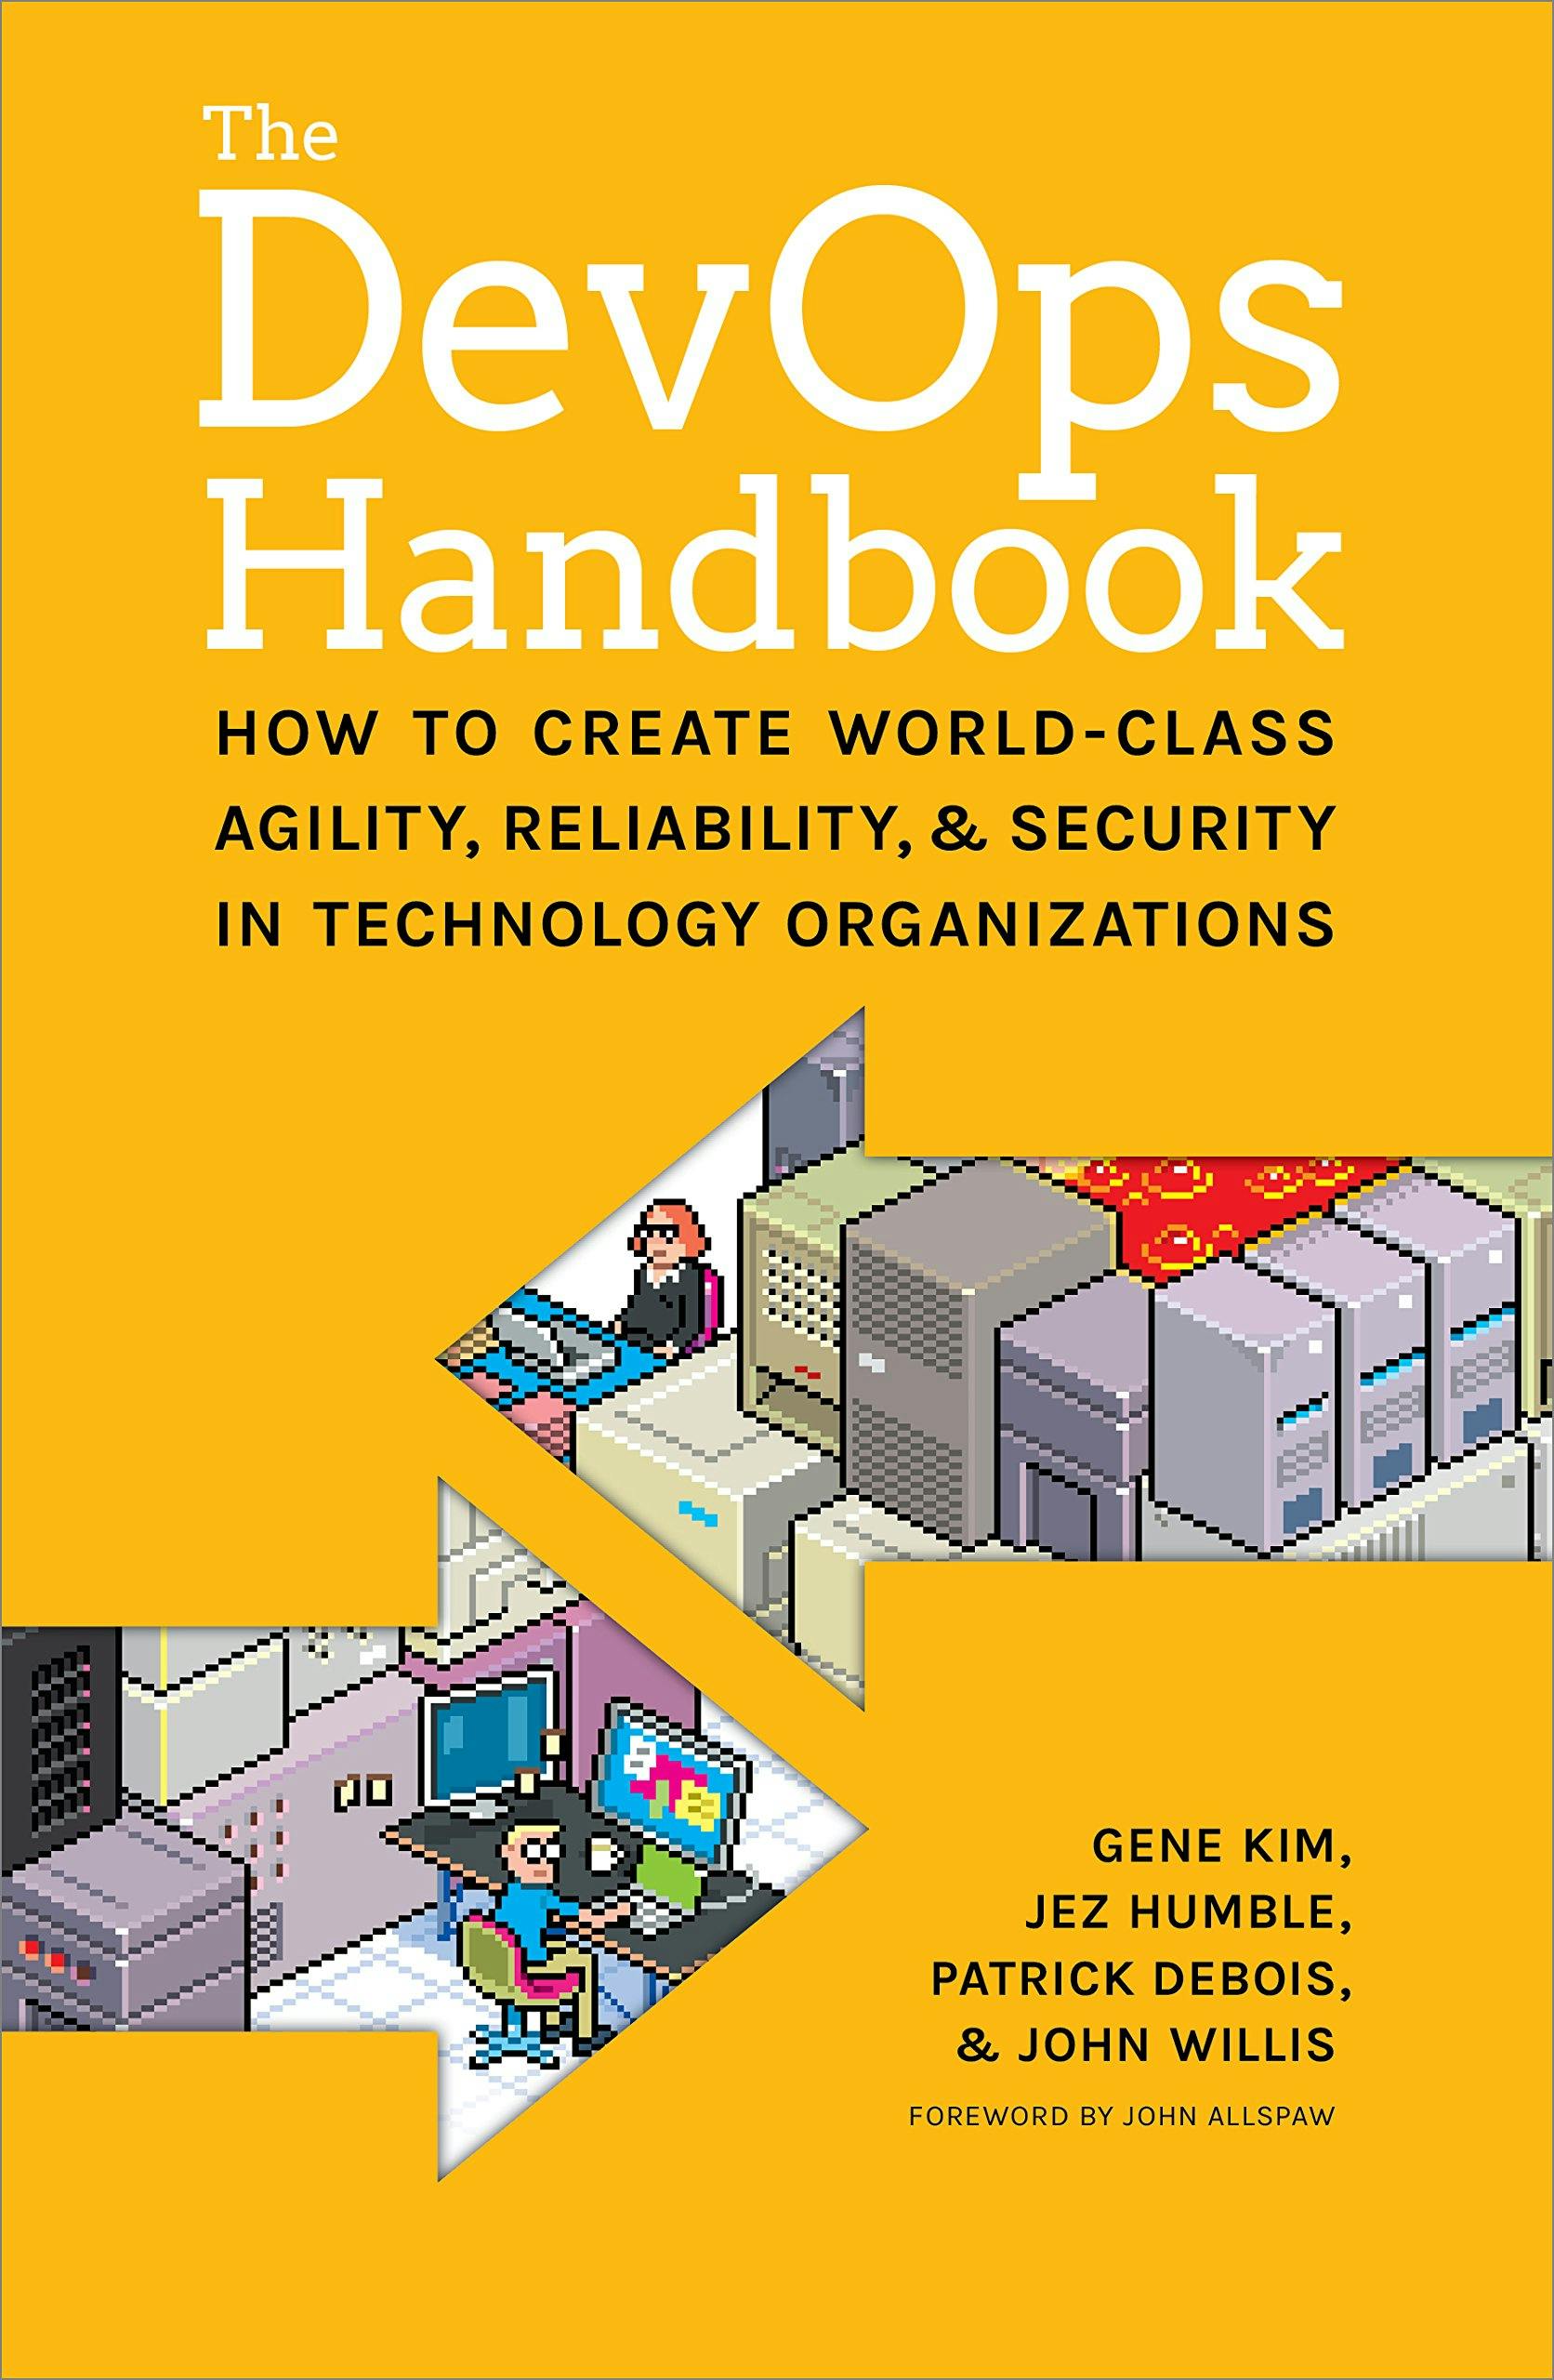 The DevOps Handbook - How to create world-class agility, reliability, & security in technology organizations